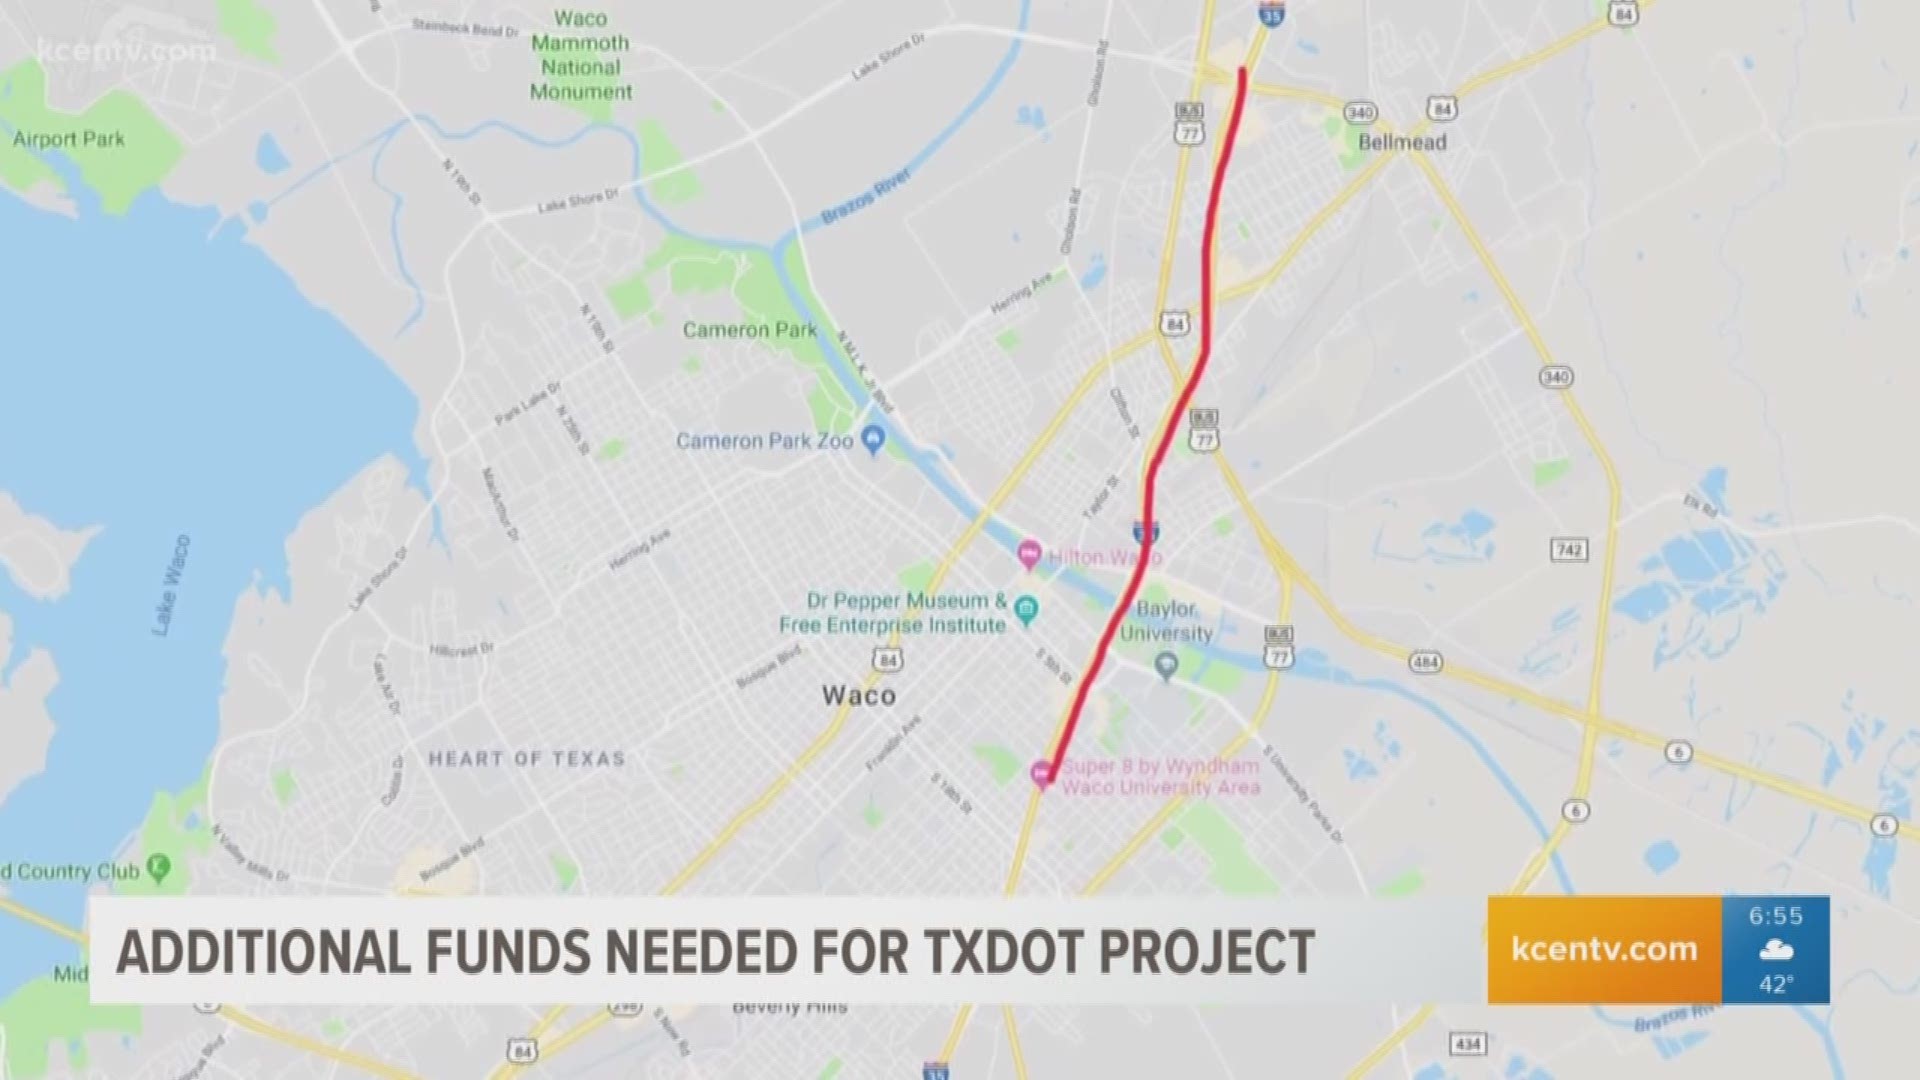 The City of Waco's MPO Policy Board will consider approving an additional $8 million from TxDOT for a $341 million project expected to begin in the coming weeks.